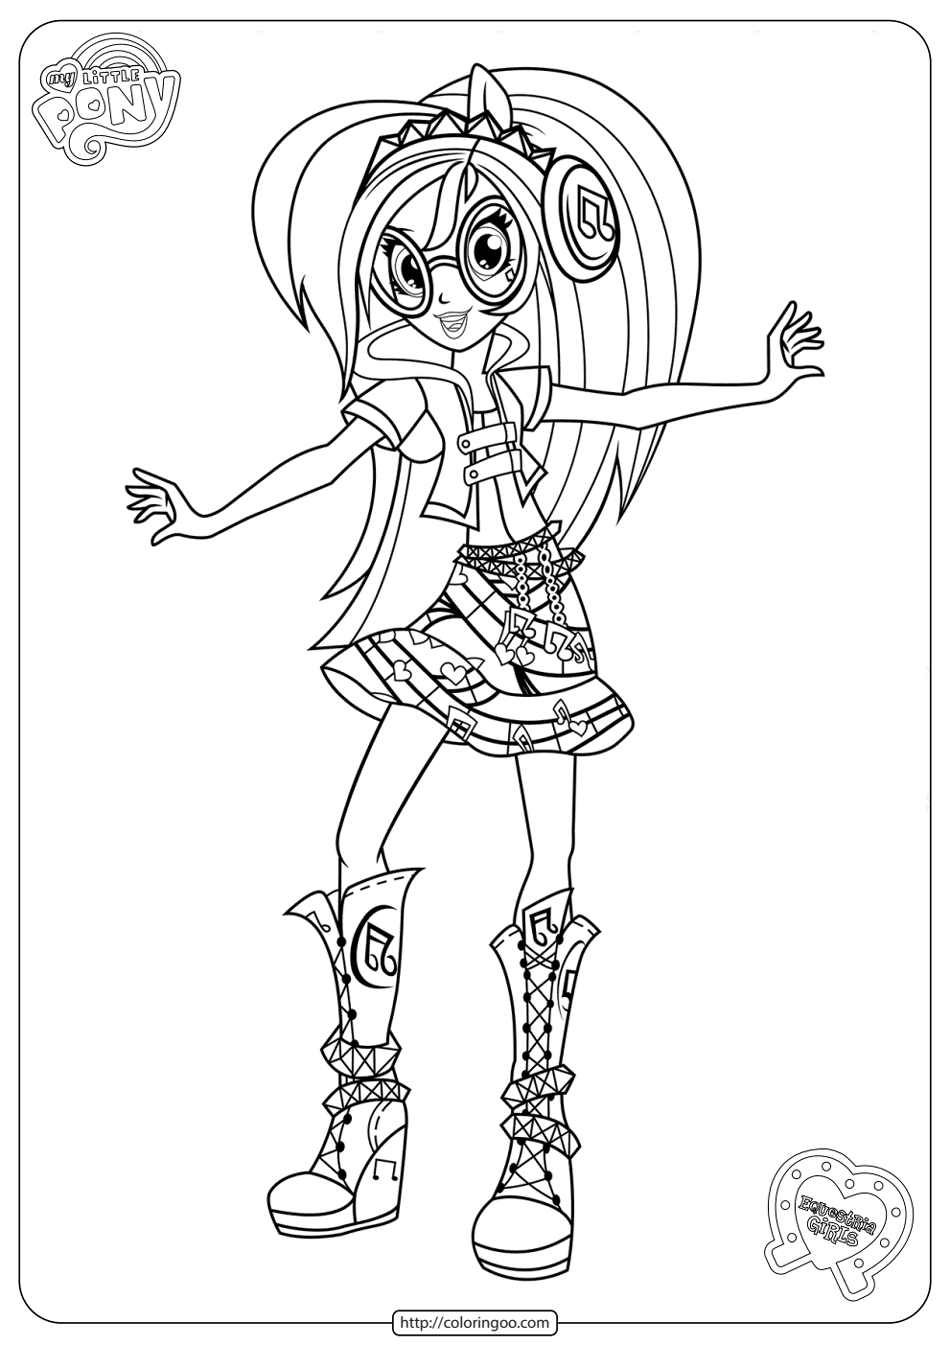 mlp equestria girls dj pon 3 coloring pages